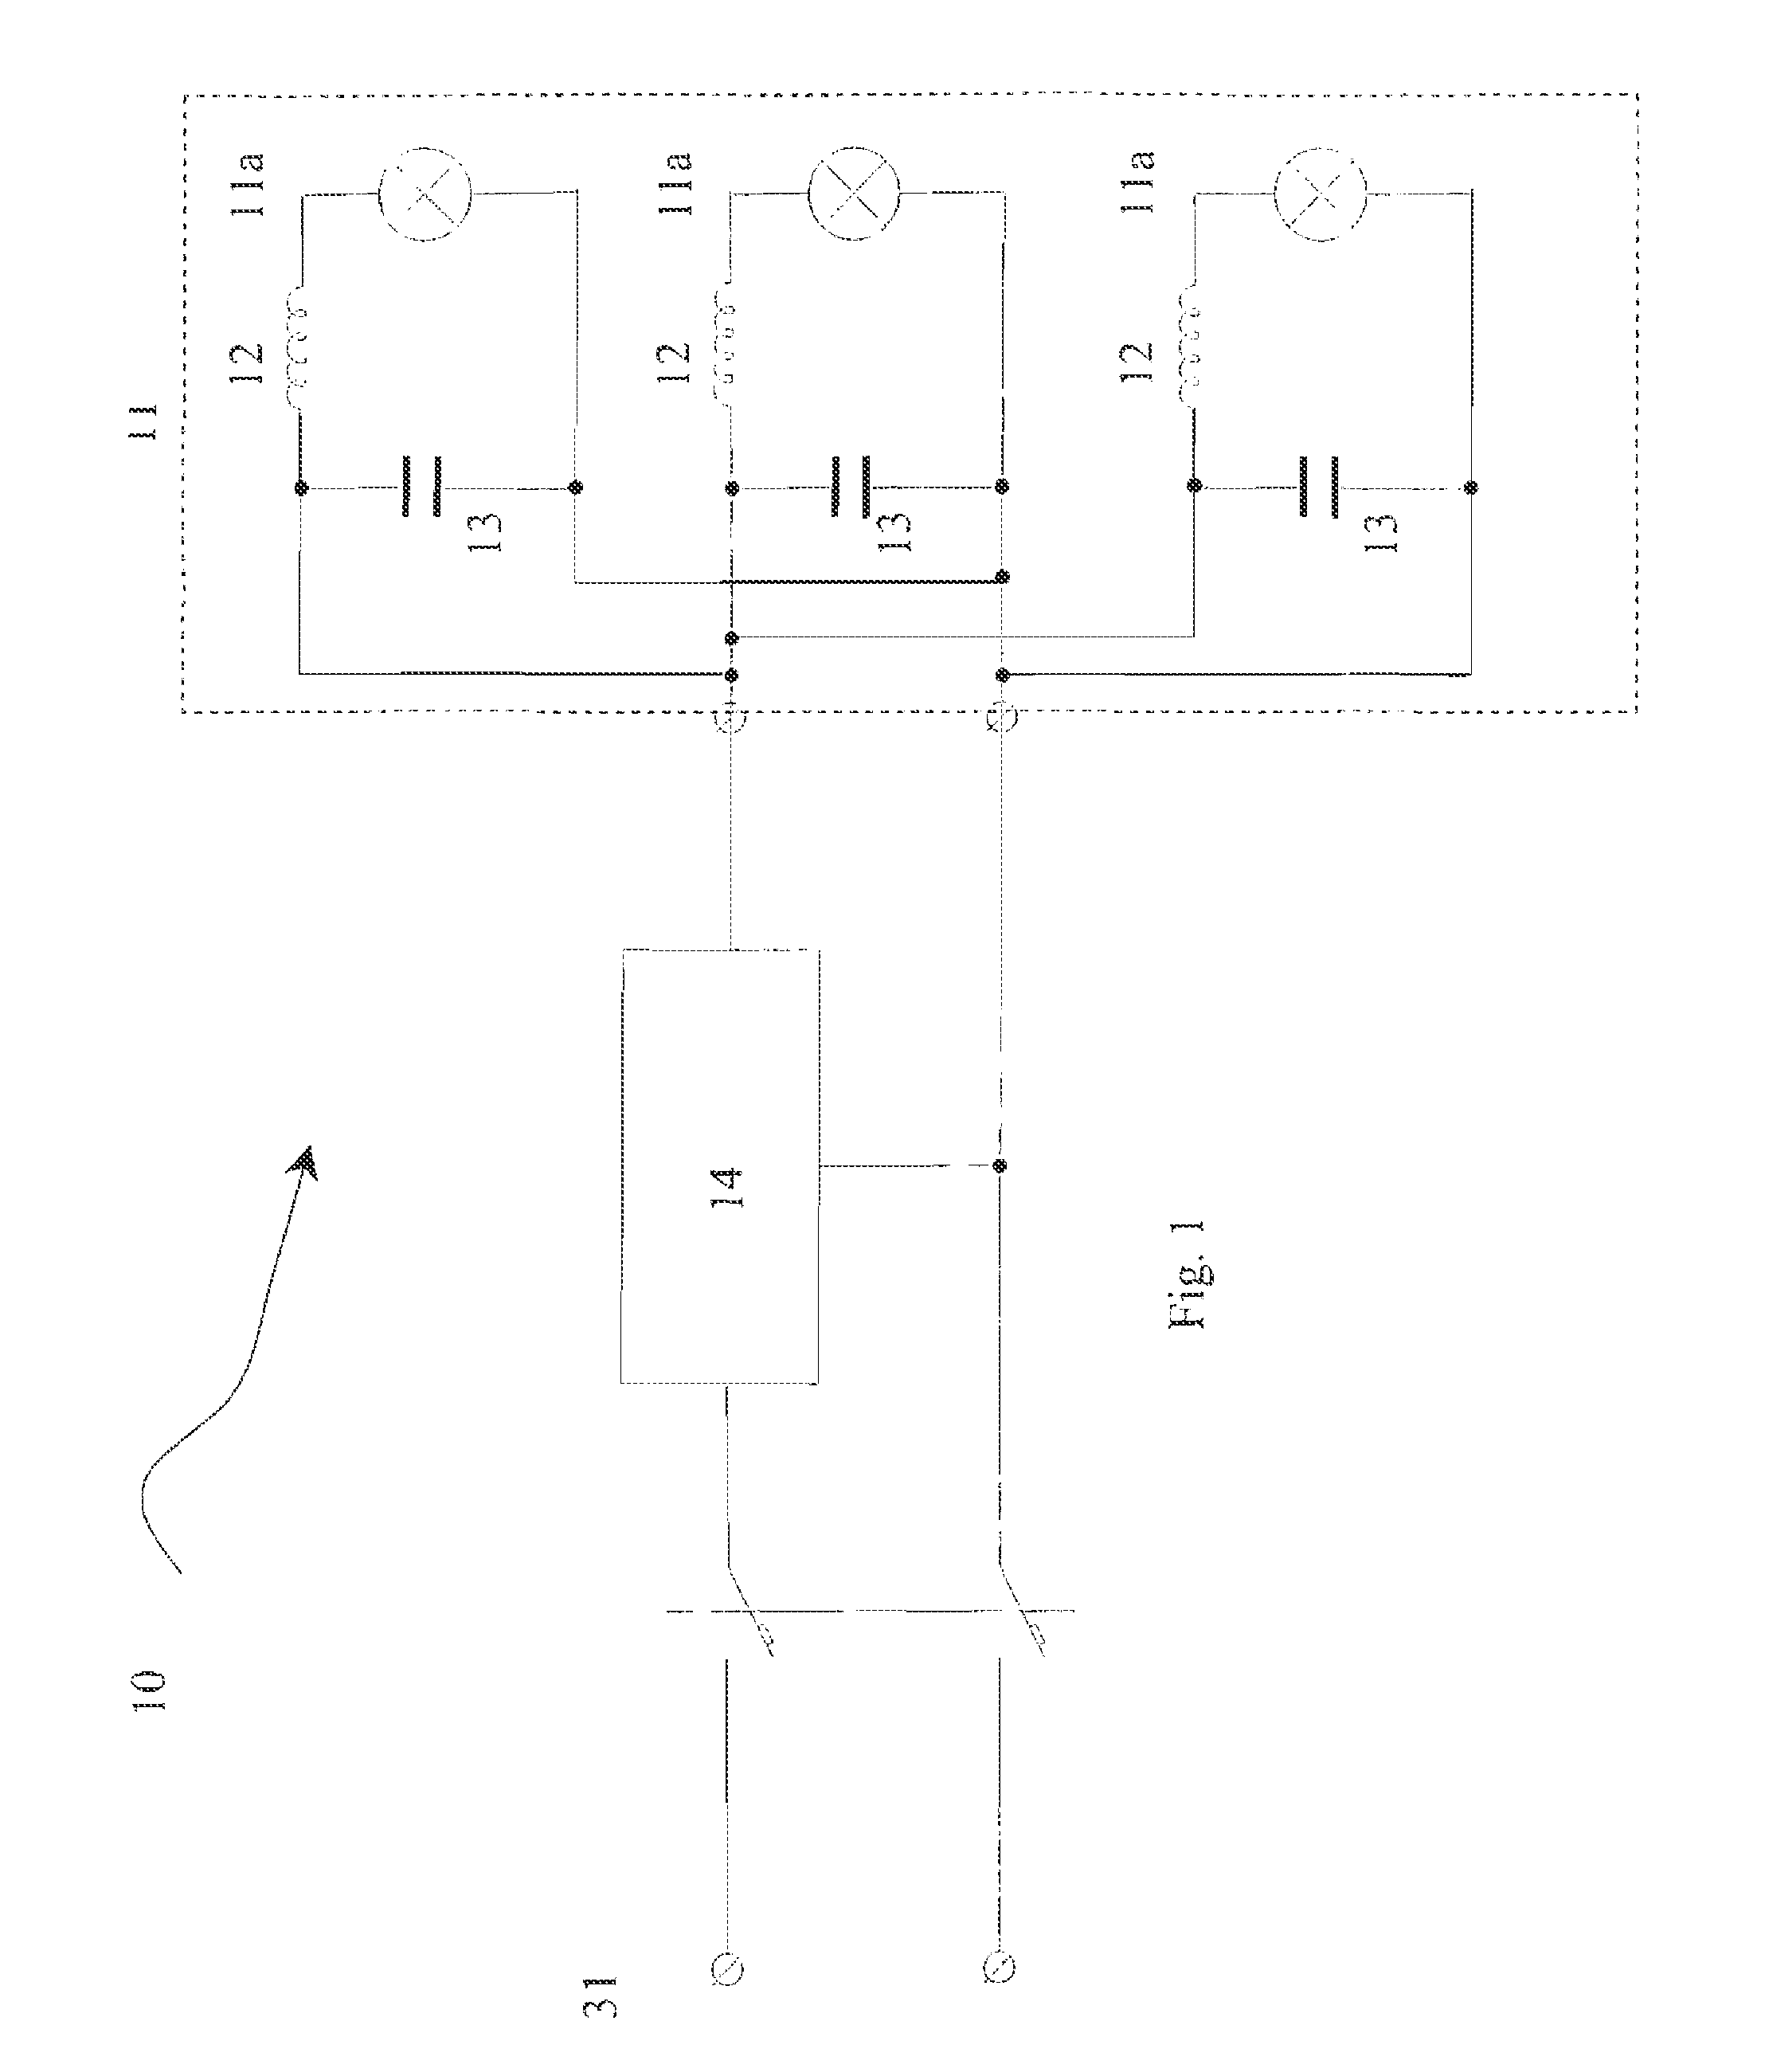 Centralized control device for controlling the application of voltage to a load provided with a power factor correction capacitor